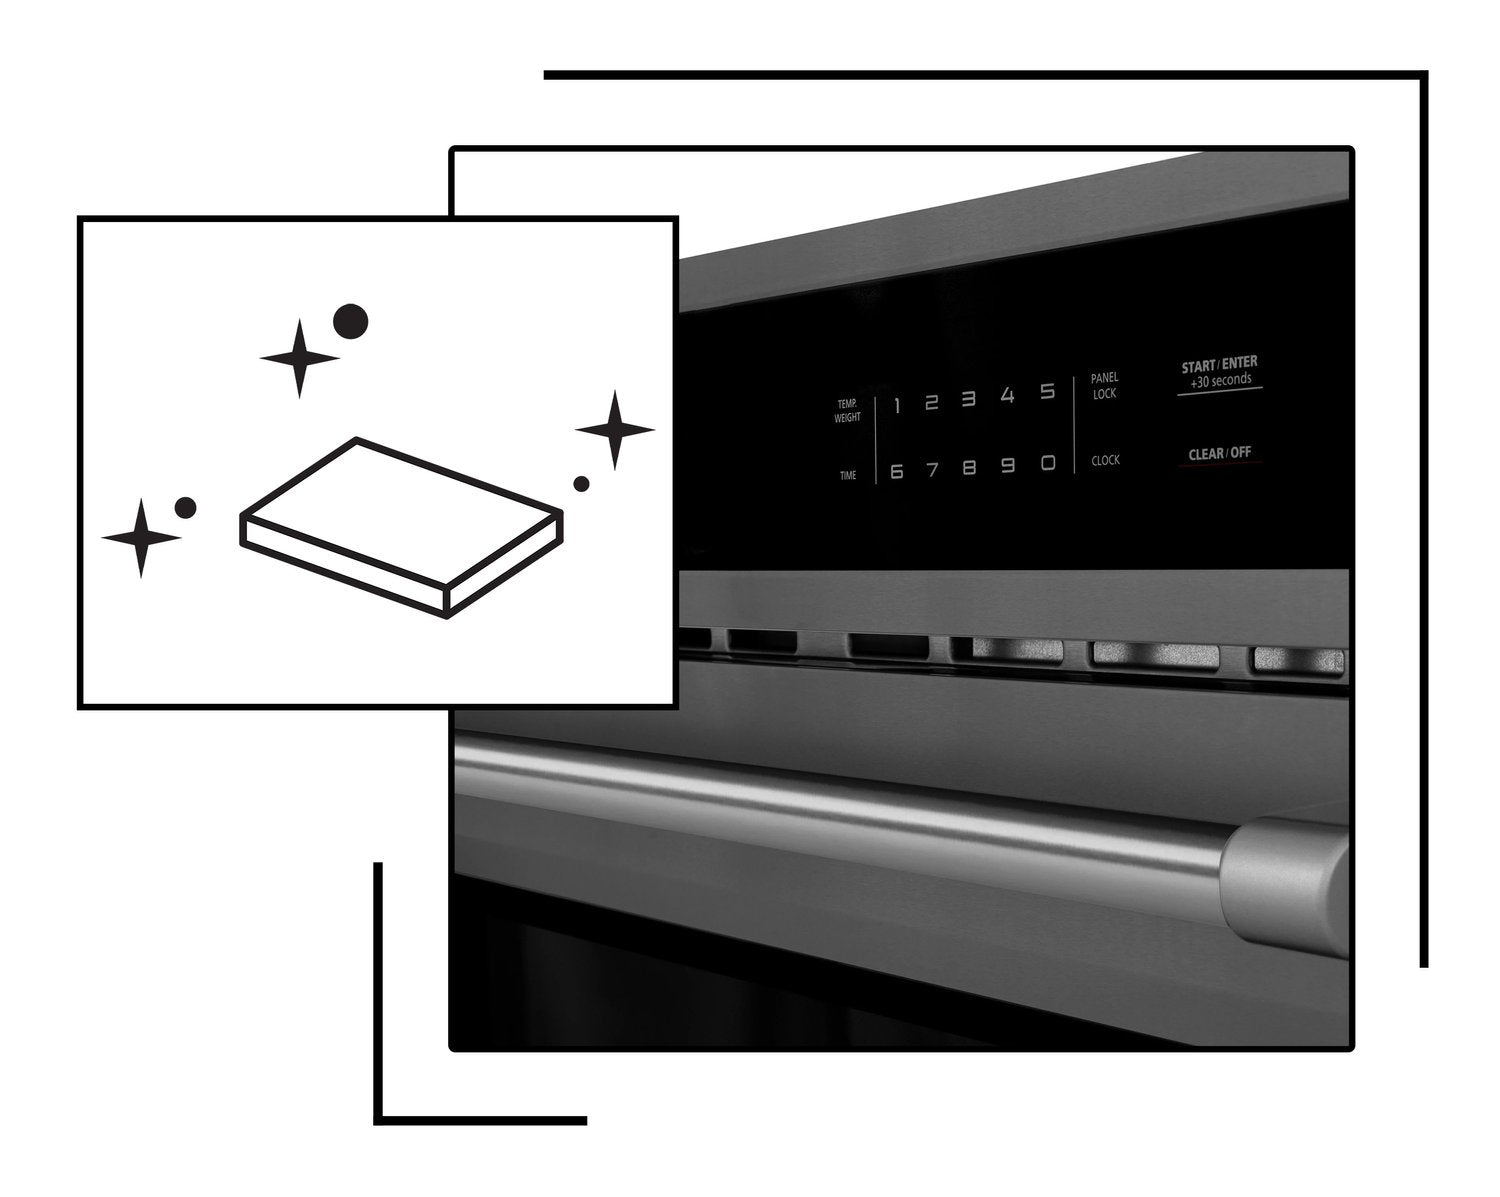 Icon and image representing microwave finish options